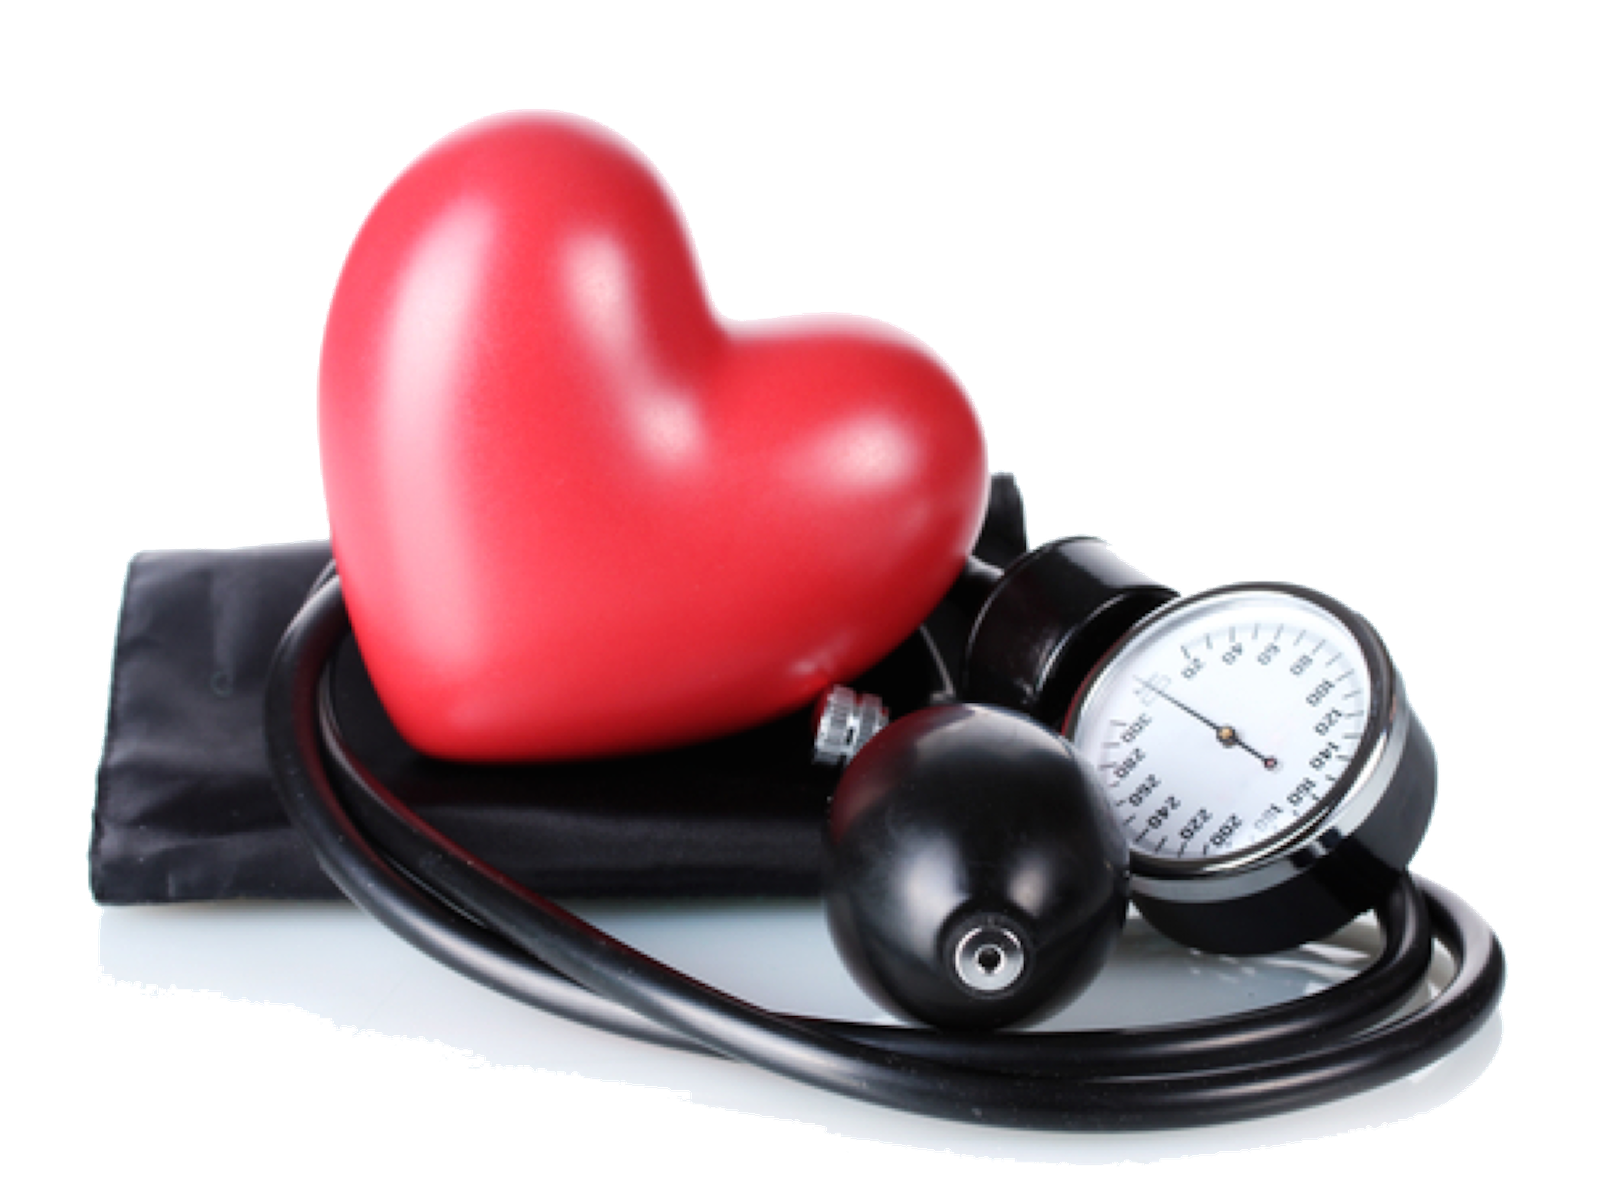 Manage High Blood Pressure Naturally